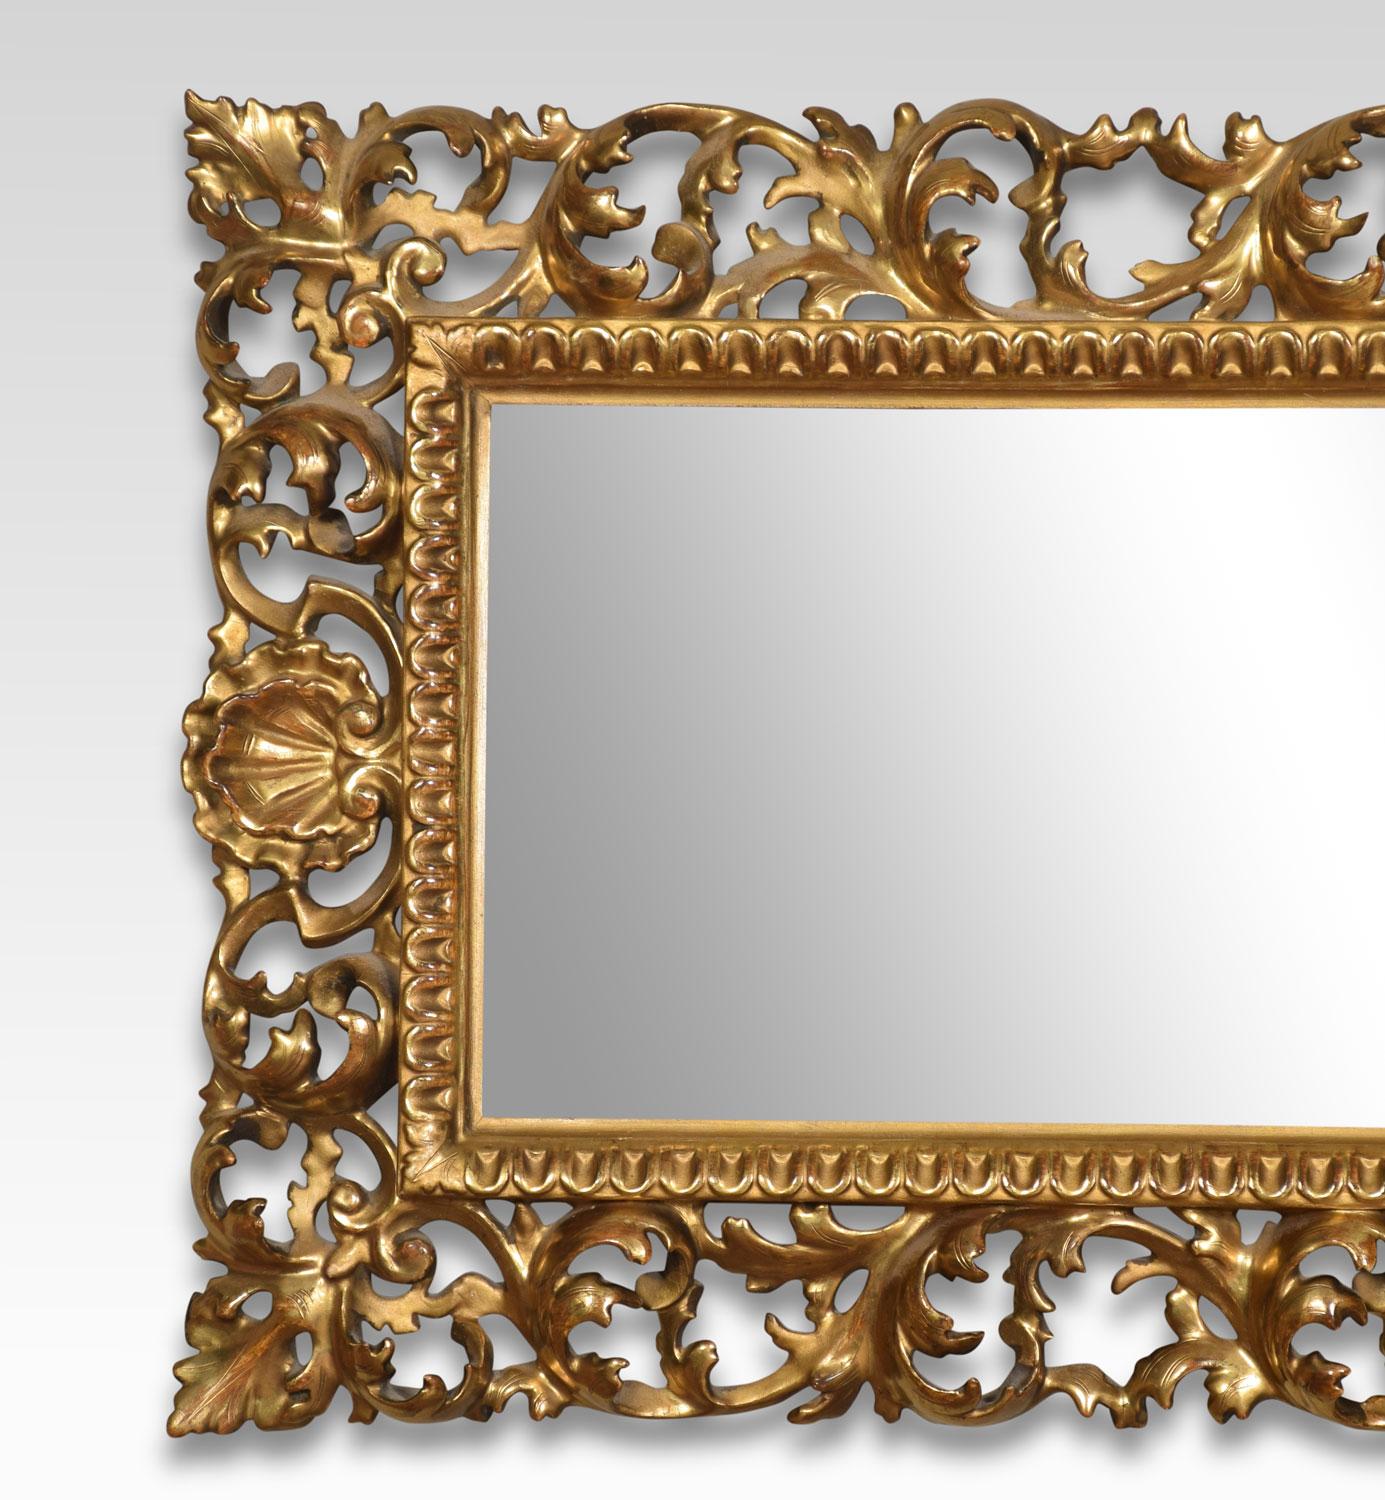 Florentine giltwood wall mirror, the original rectangular mirror plate surrounded by scrolling leaf and shell carved frame.
Dimensions:
Height 16 inches
Width 38 inches
Depth 2 inches.